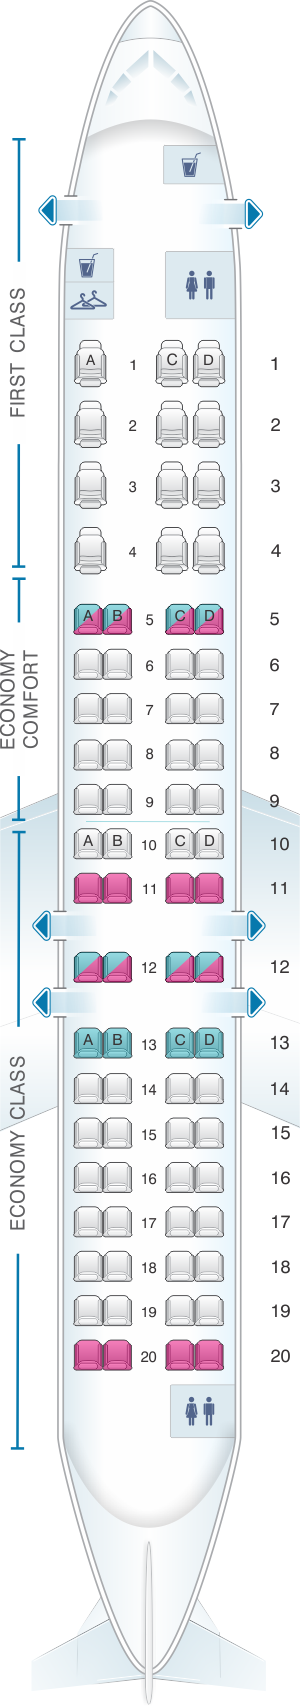 Seat map for Delta Air Lines Bombardier CRJ 900